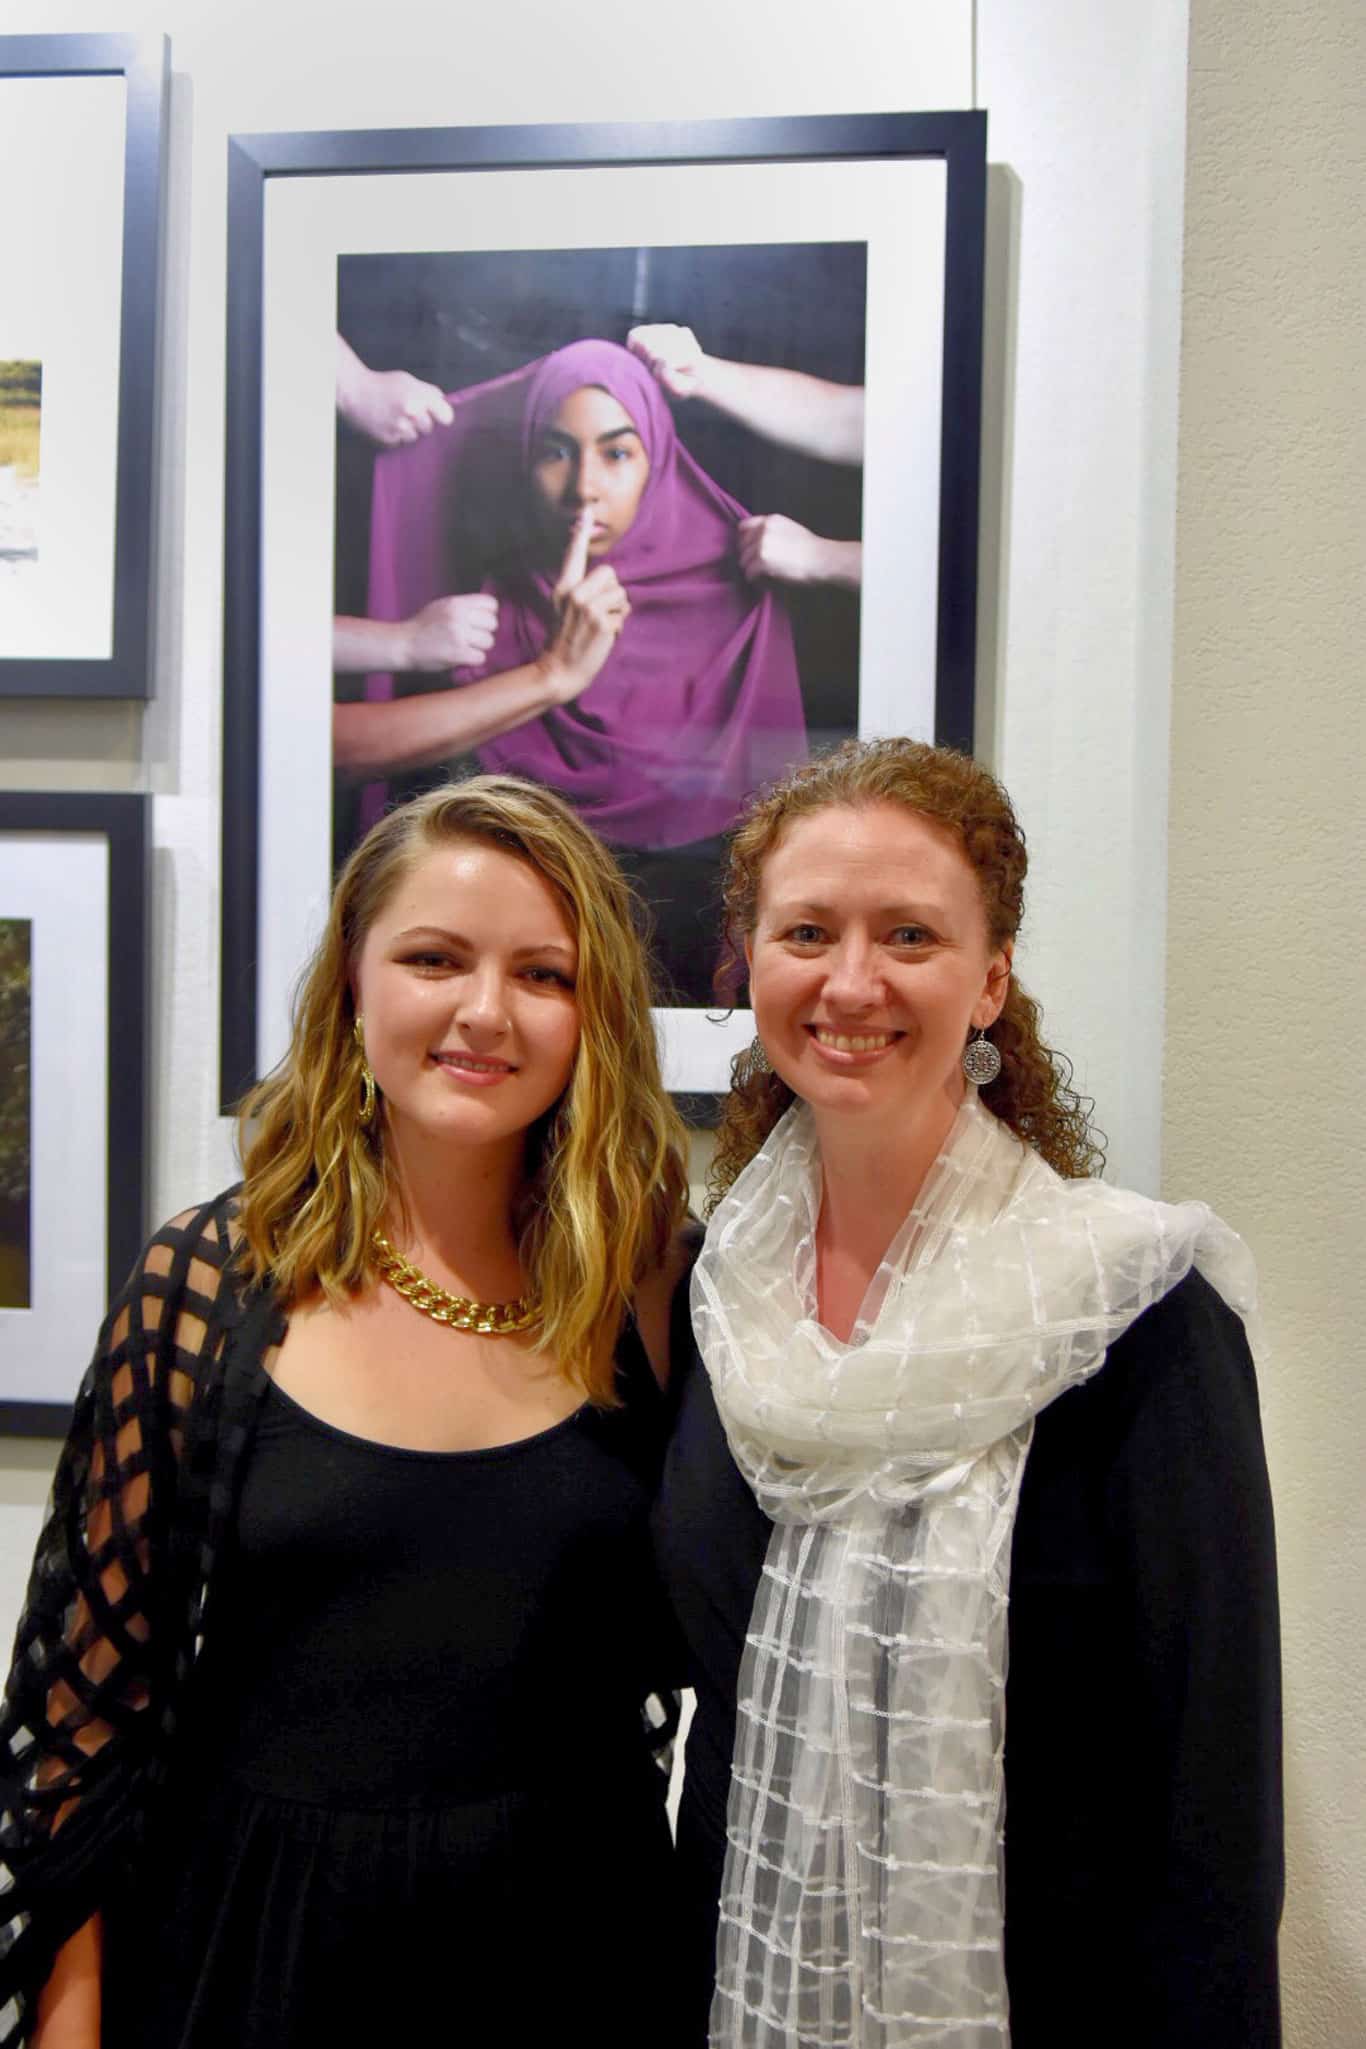 Kylie Crowell Awarded Best in Show for "Intolerance"